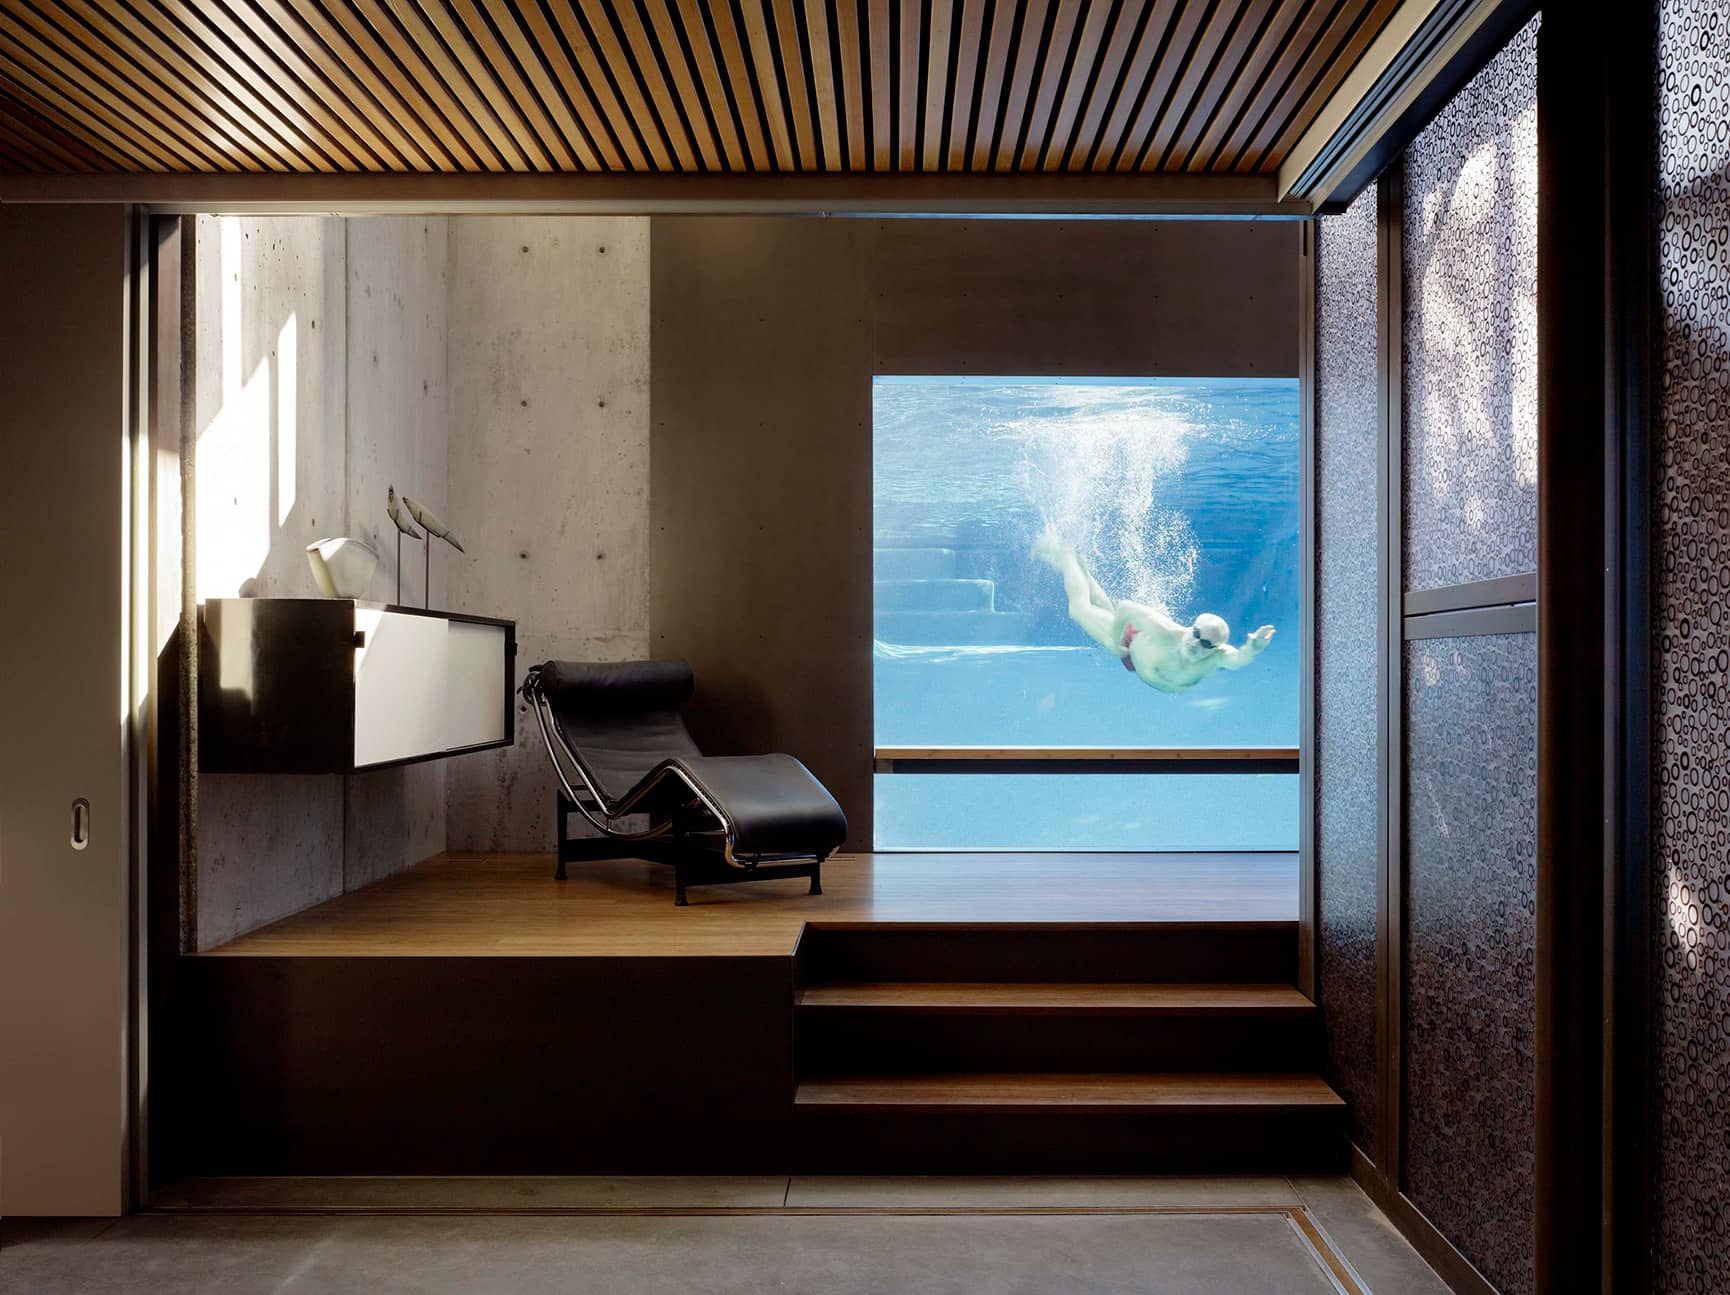 Mid-century modern interior with view of homeowner swimming in pool.